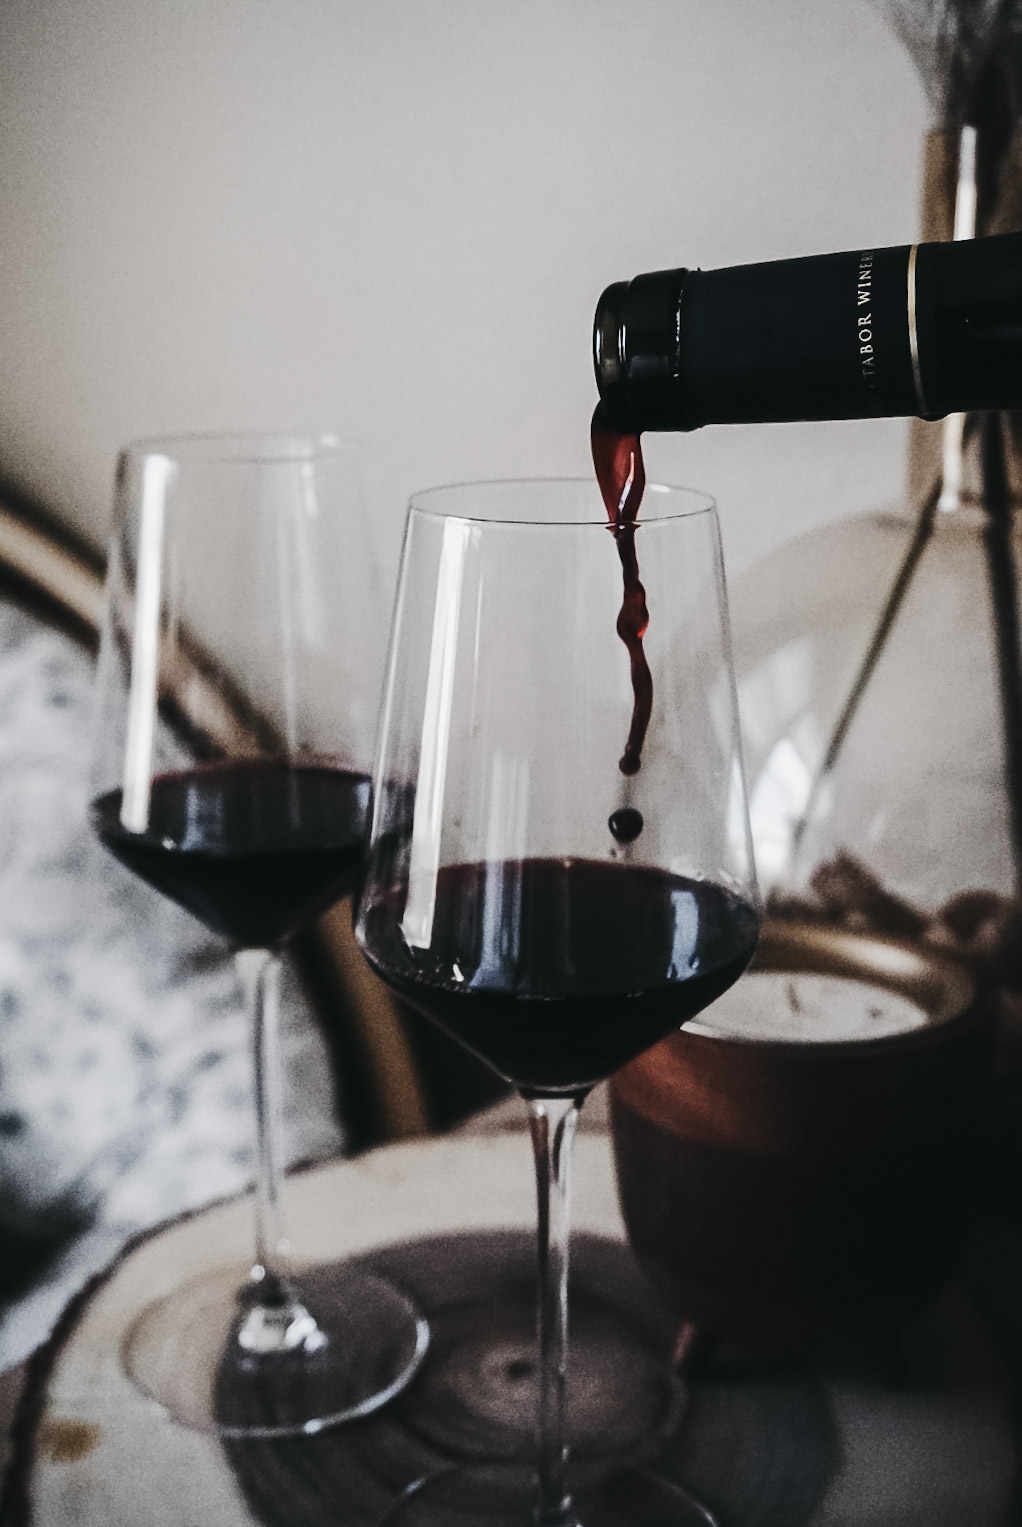 Merlot being poured into a glass